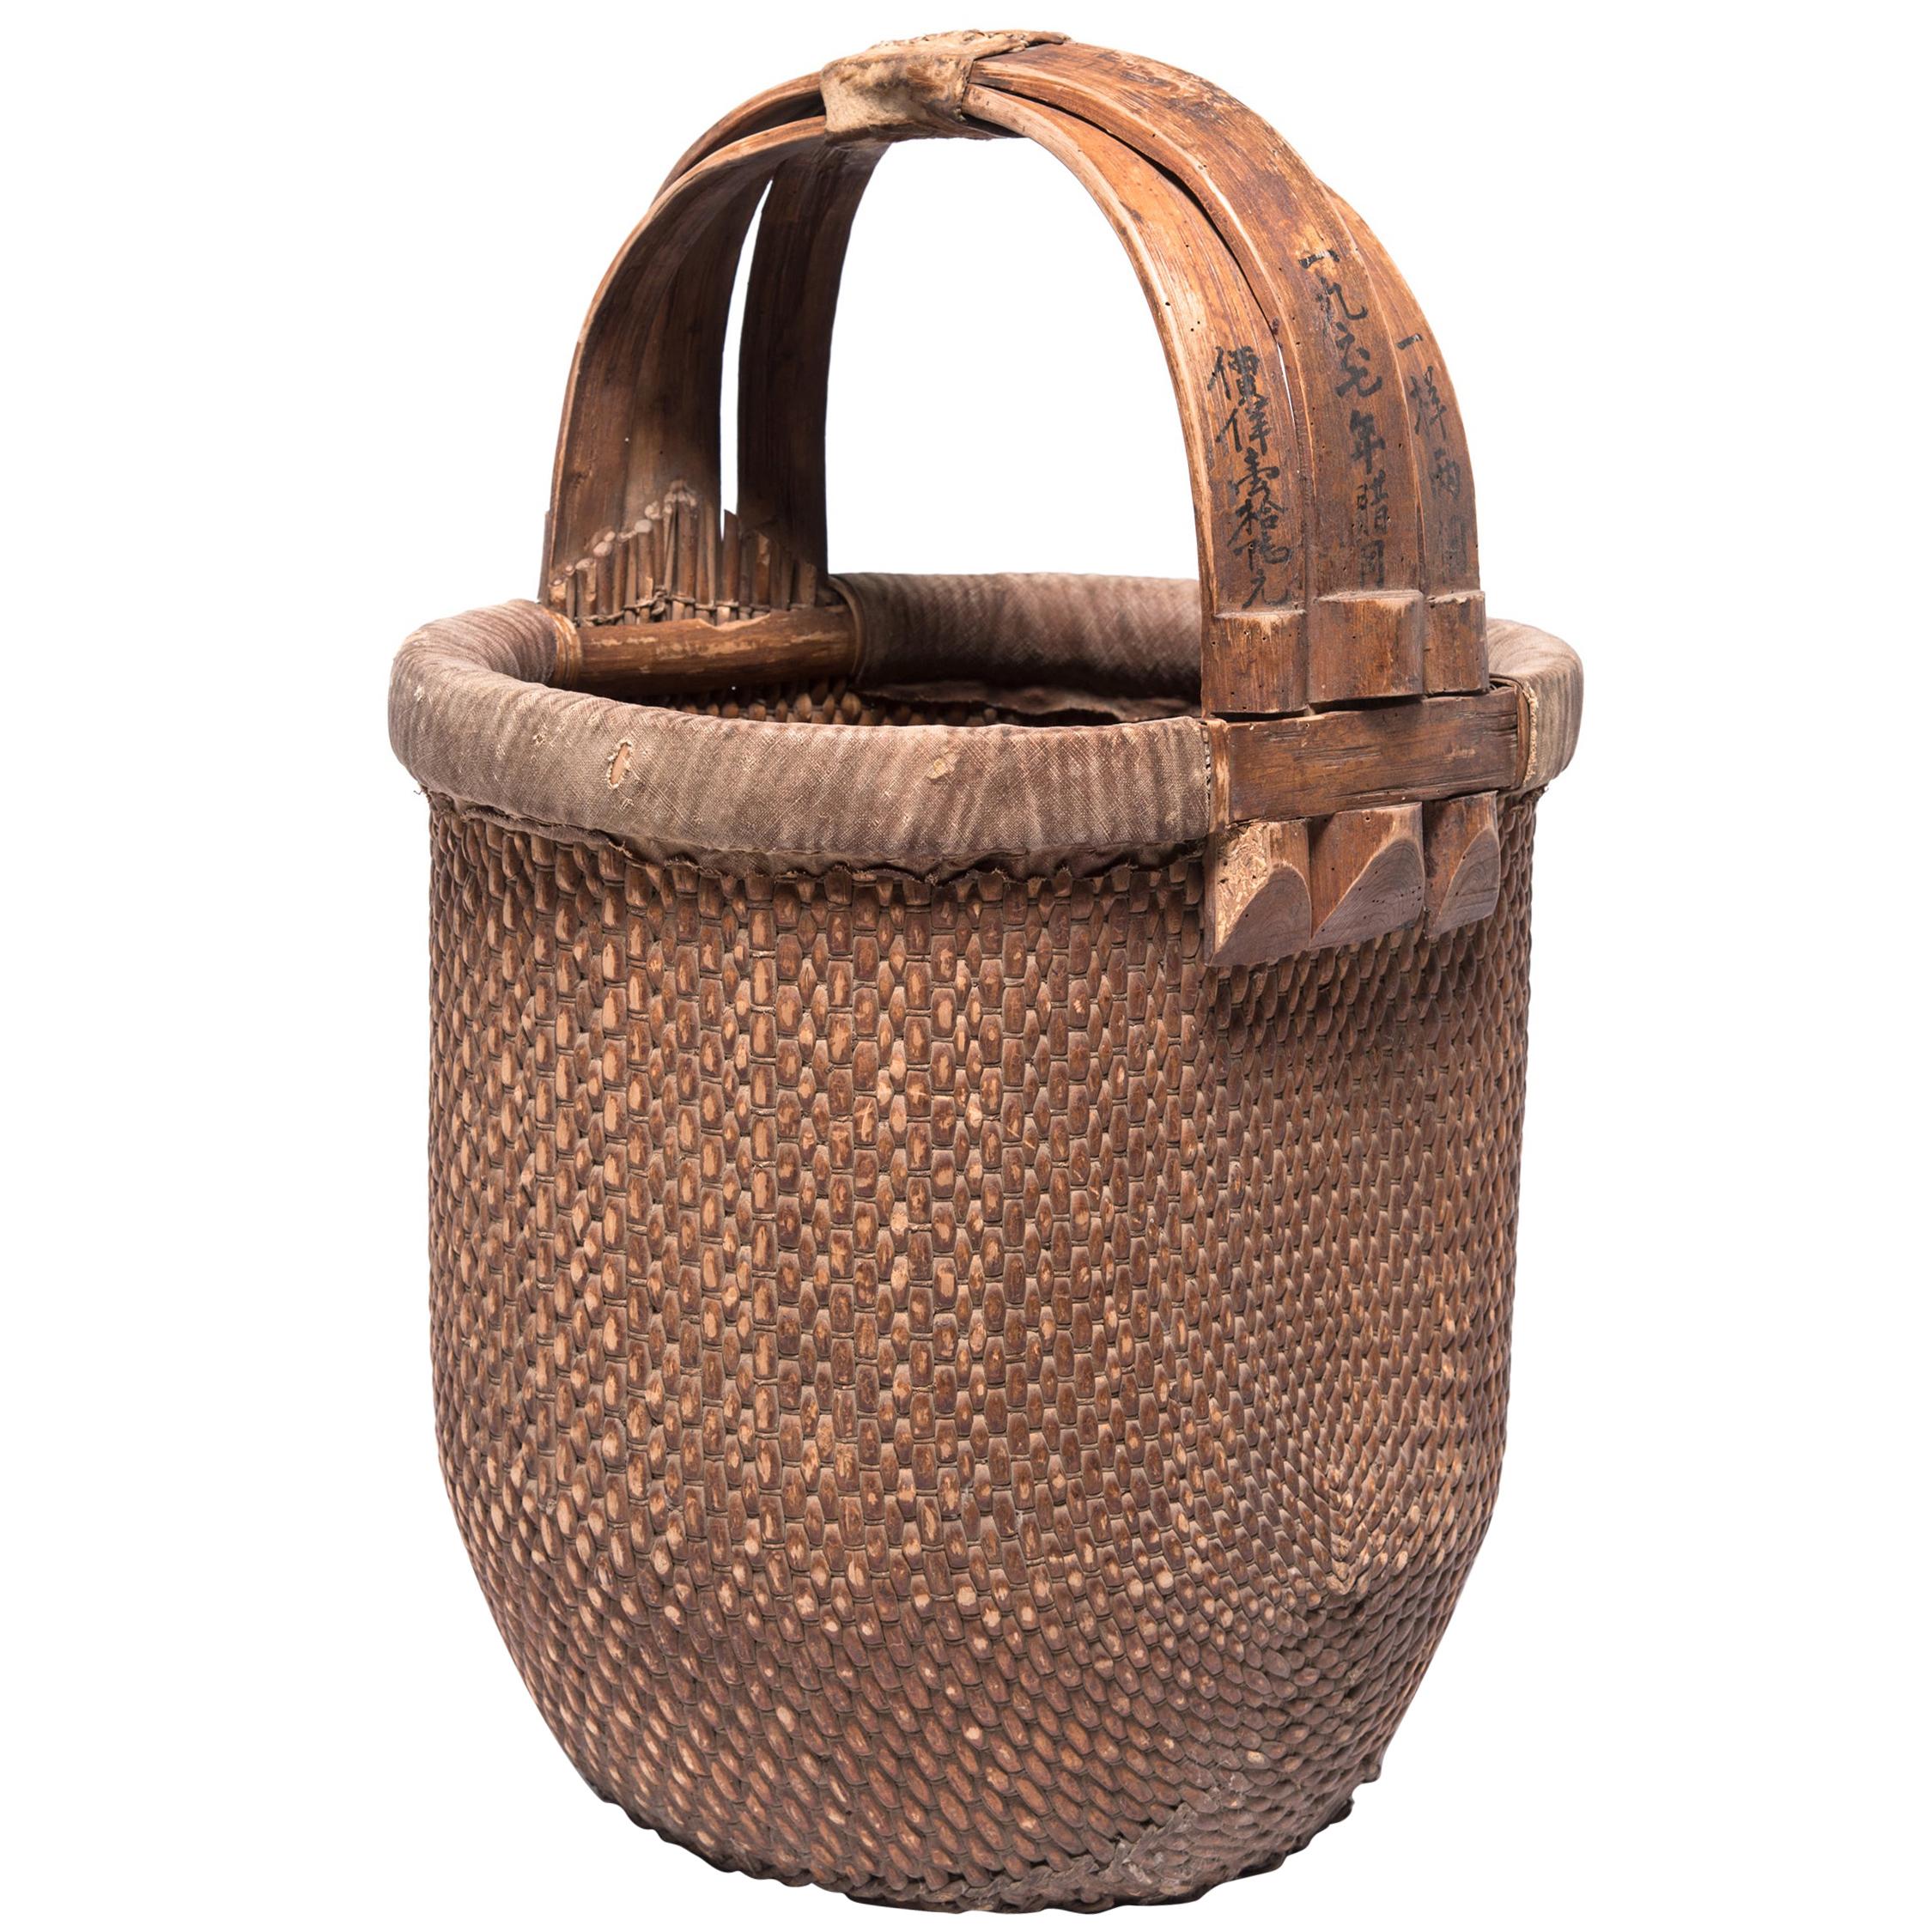 Chinese Bent Handle Fisherman's Basket, c. 1850 For Sale